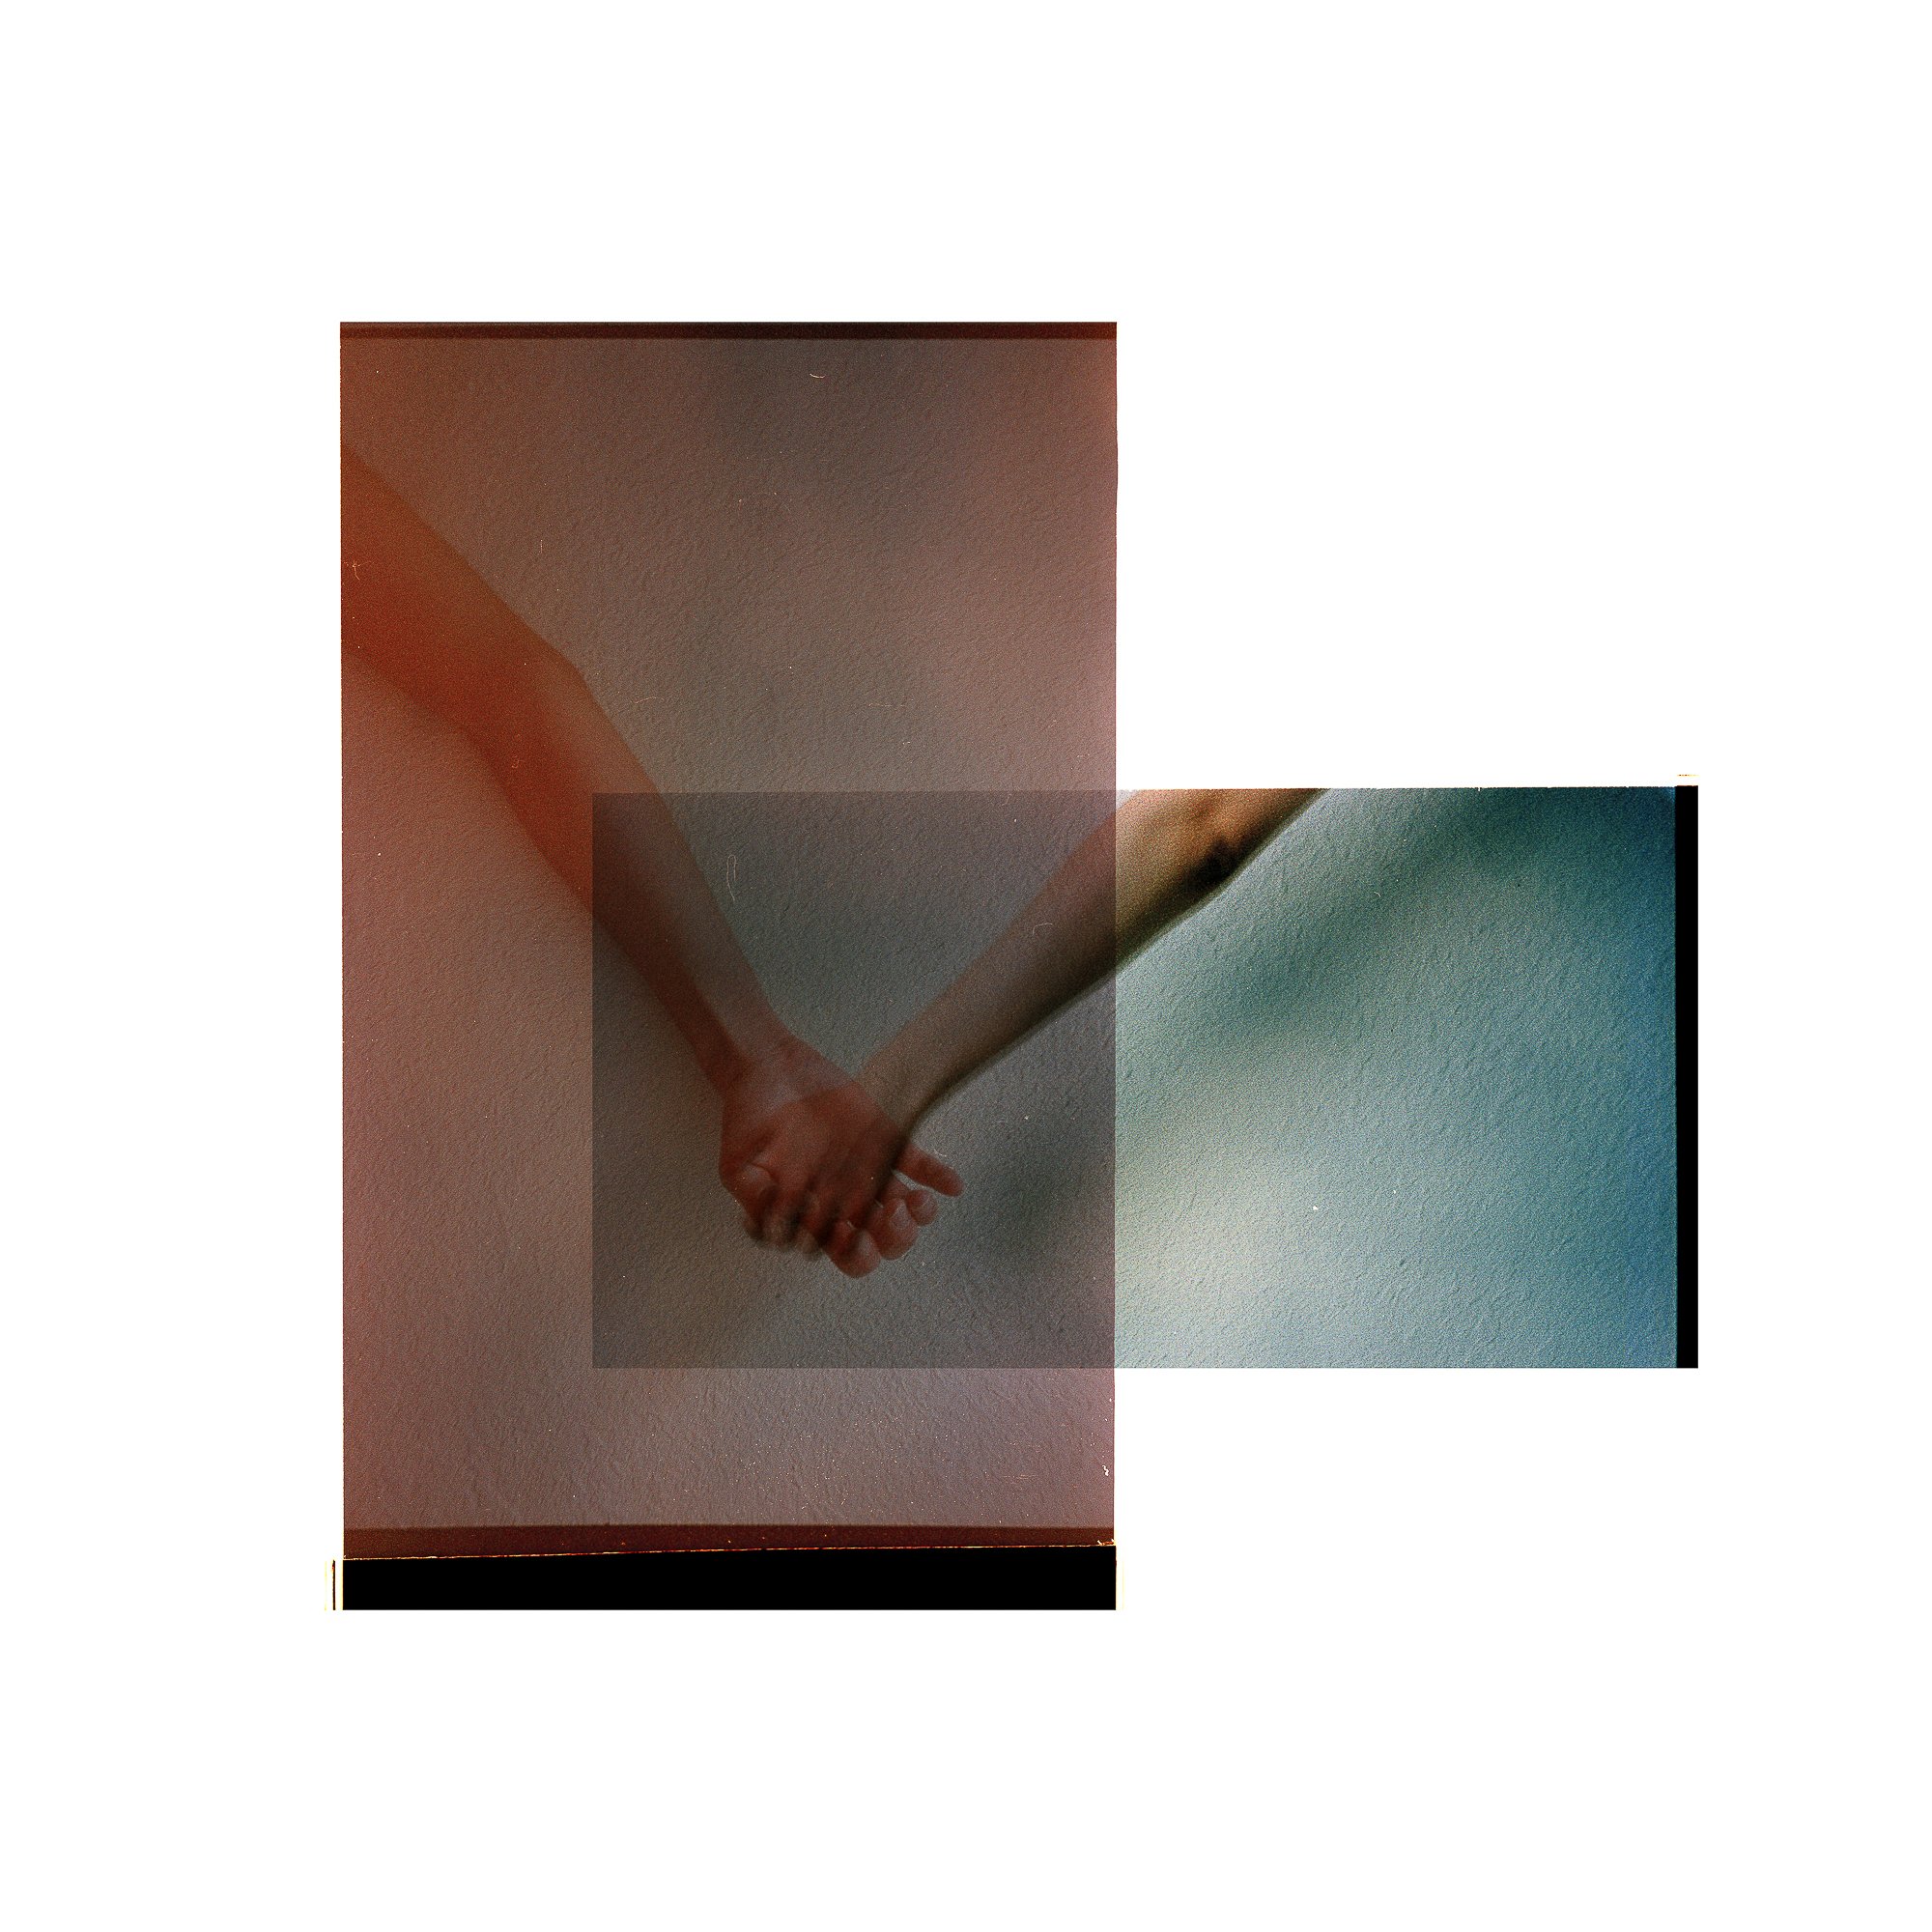 1994&amp;amp;1999: Hold My Hand 2021 From the series “UnFrame: Relationship”